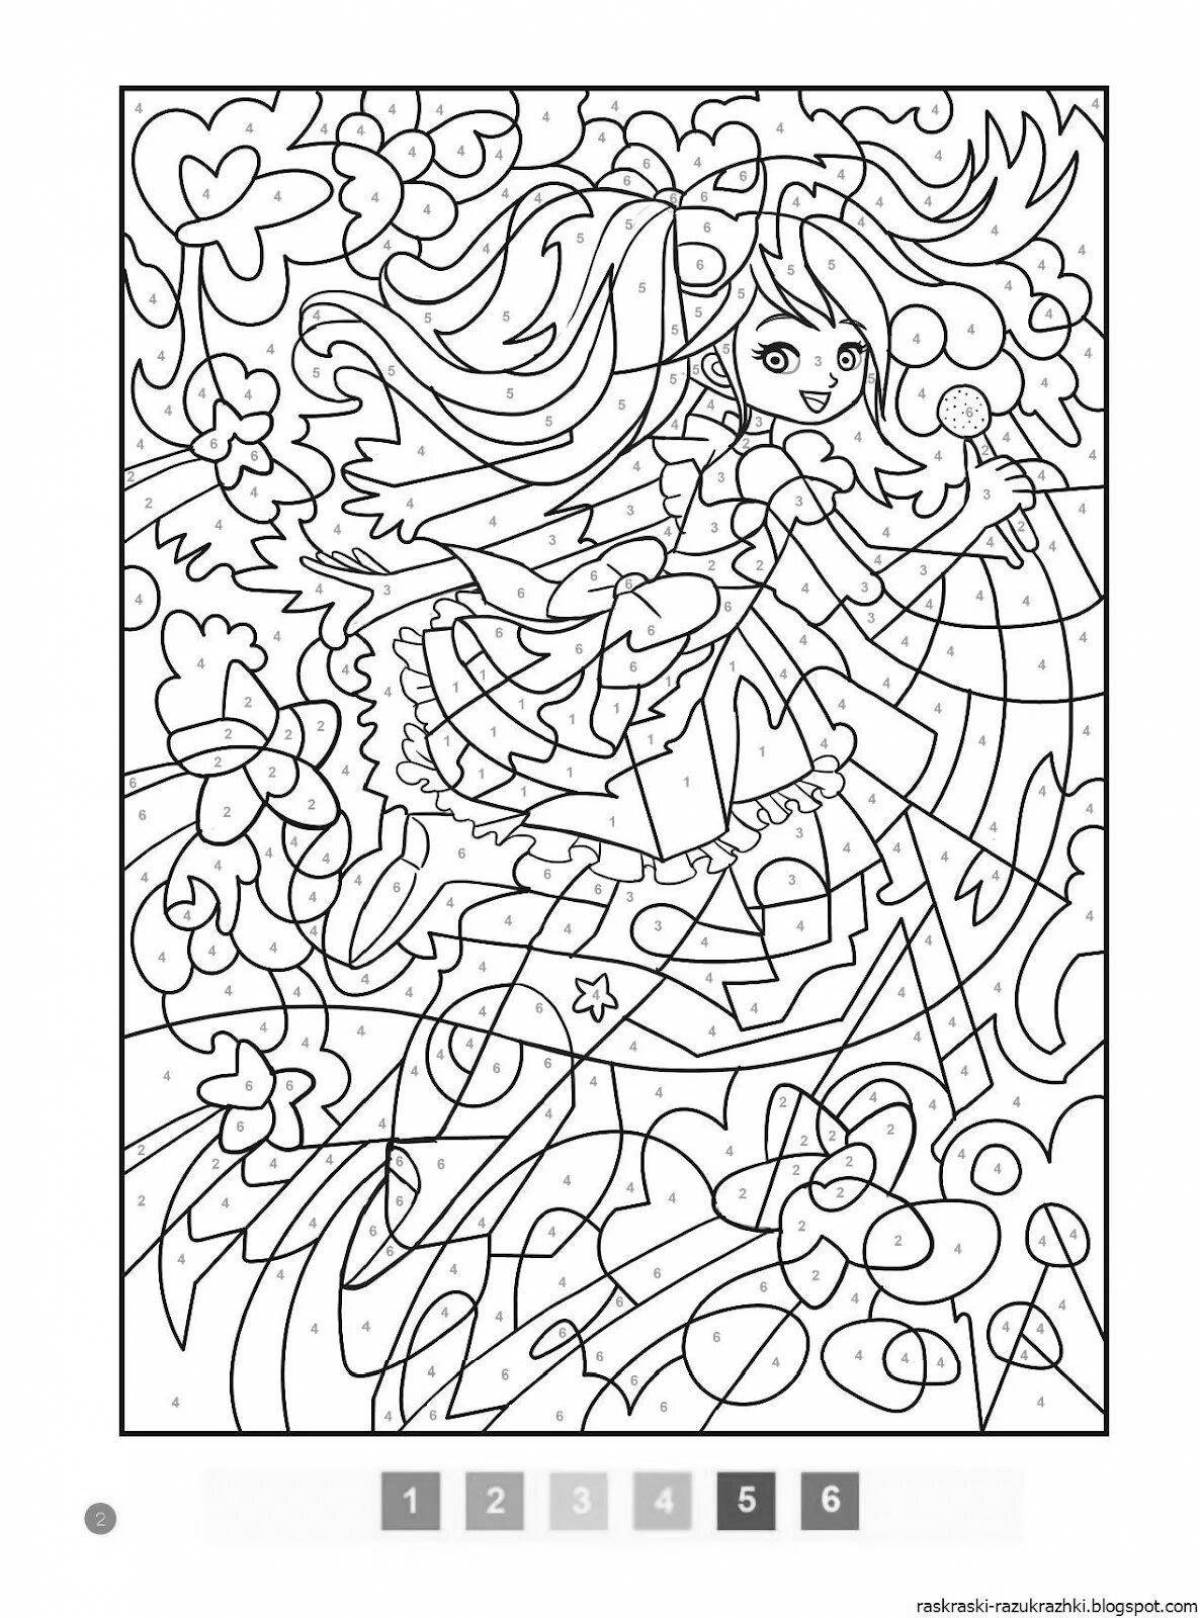 Fun coloring pages for 13 year old girls